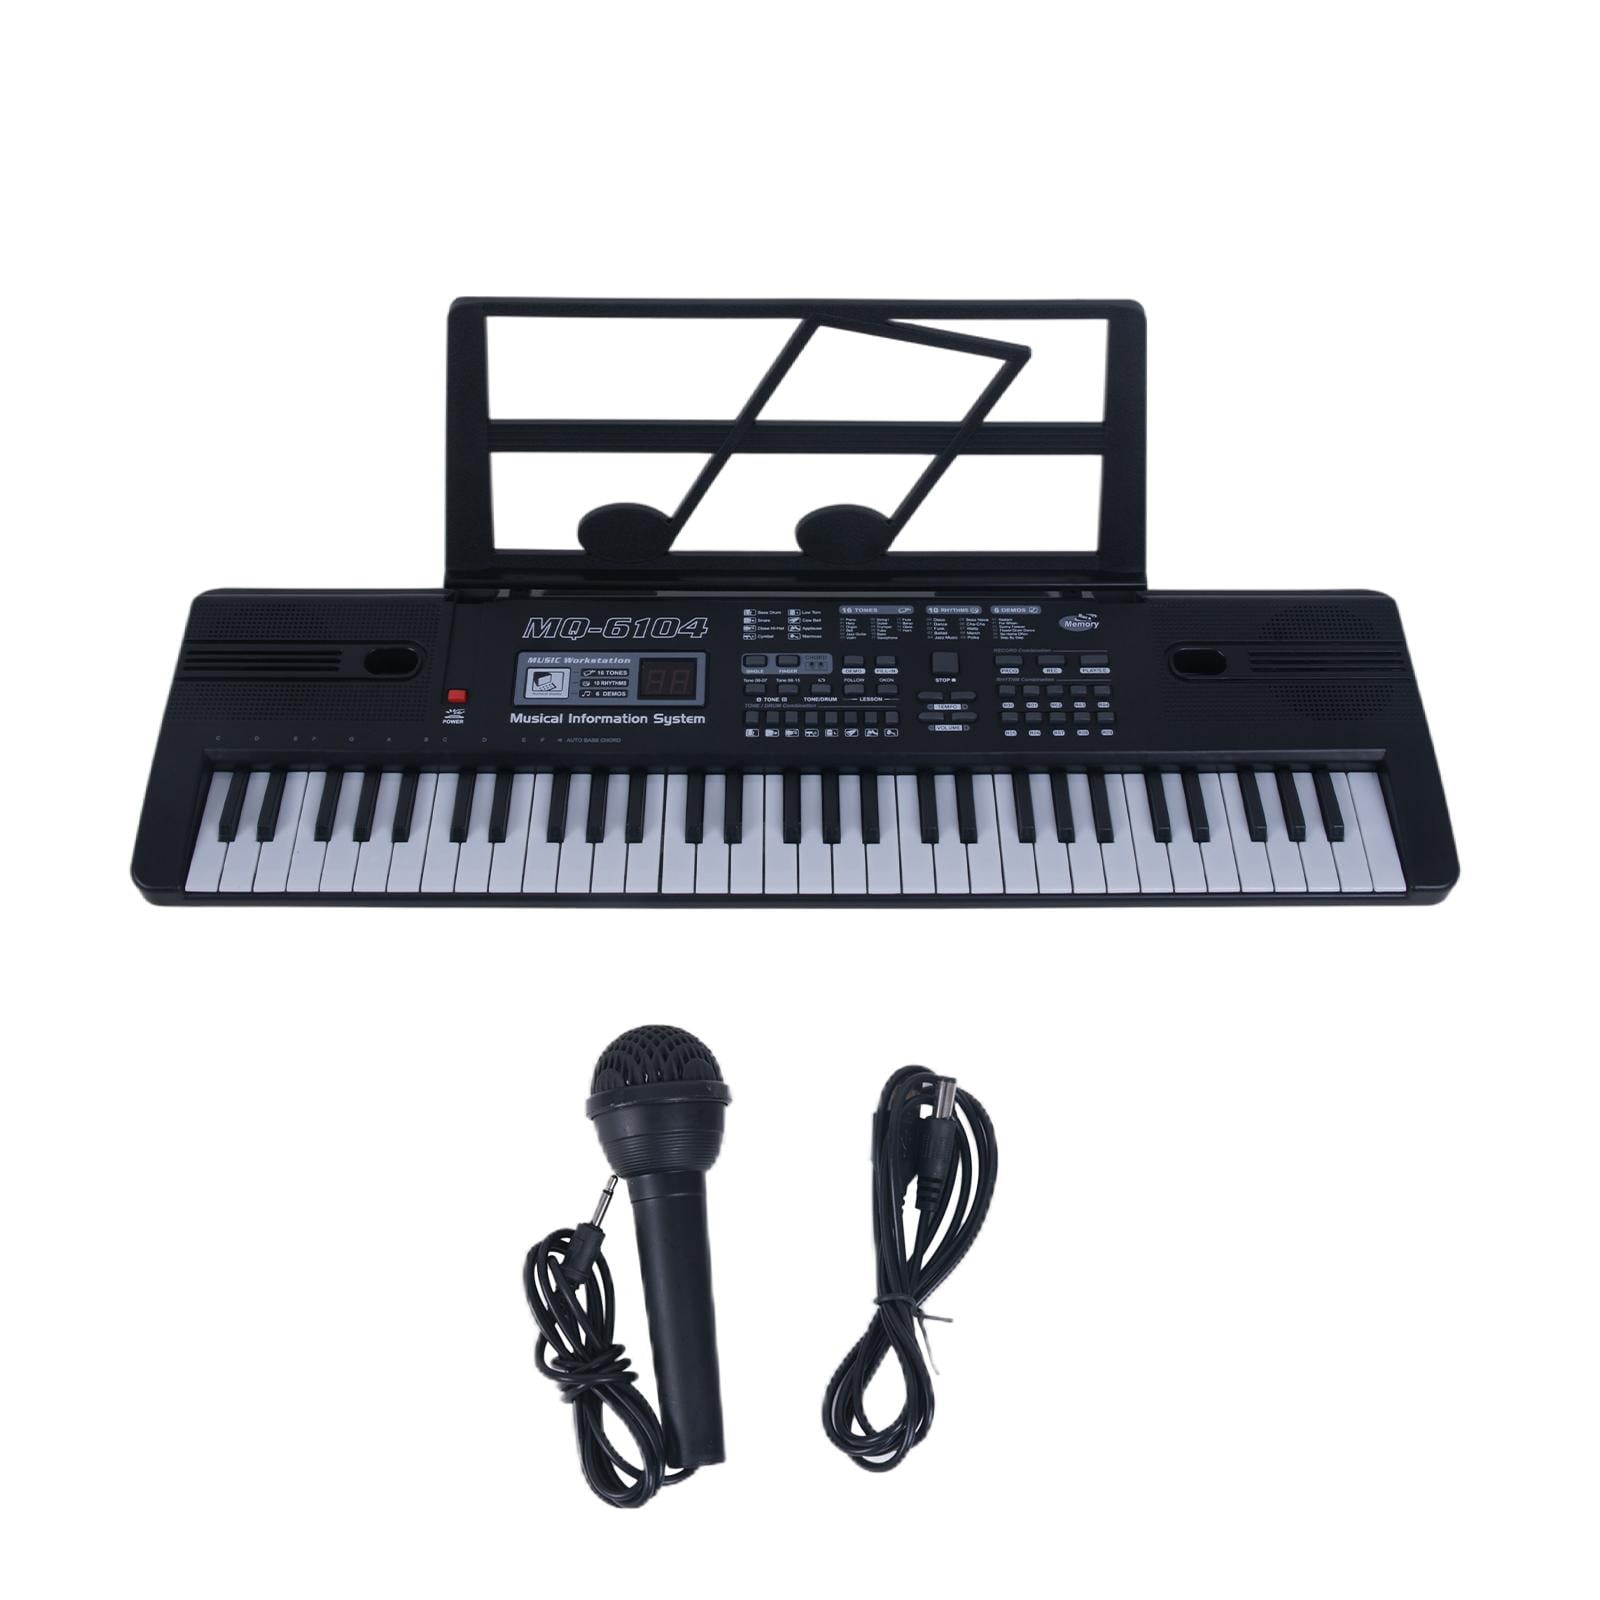 Rabing Piano Toy Keyboard for Kids 31 Keys Toy Piano with Microphone Multiple Music Modes Educational Music Instrument for Toddlers Baby and Boy 